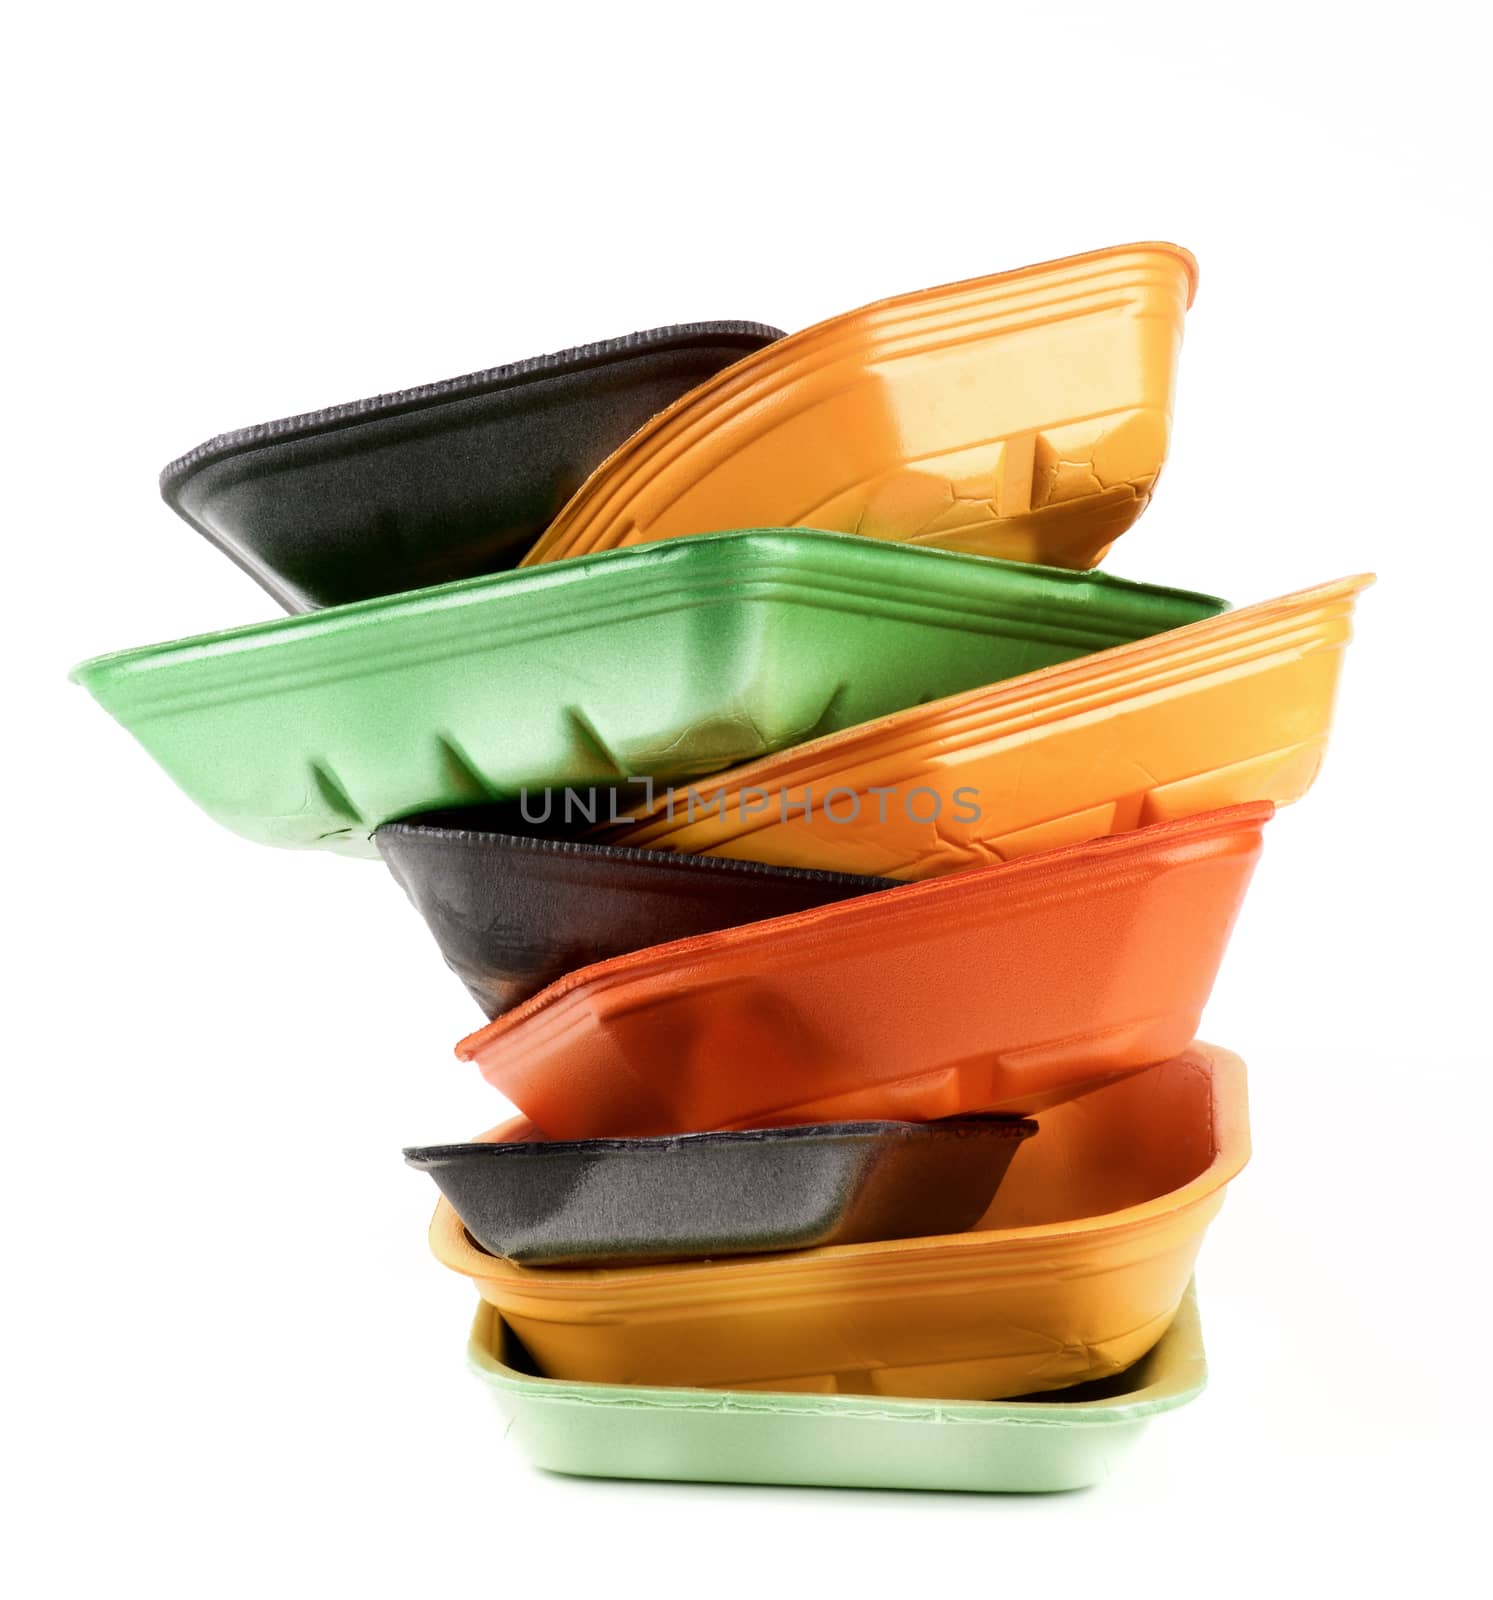 Arrangement of Black, Green and Orange Empty Recycled Trays isolated on White background